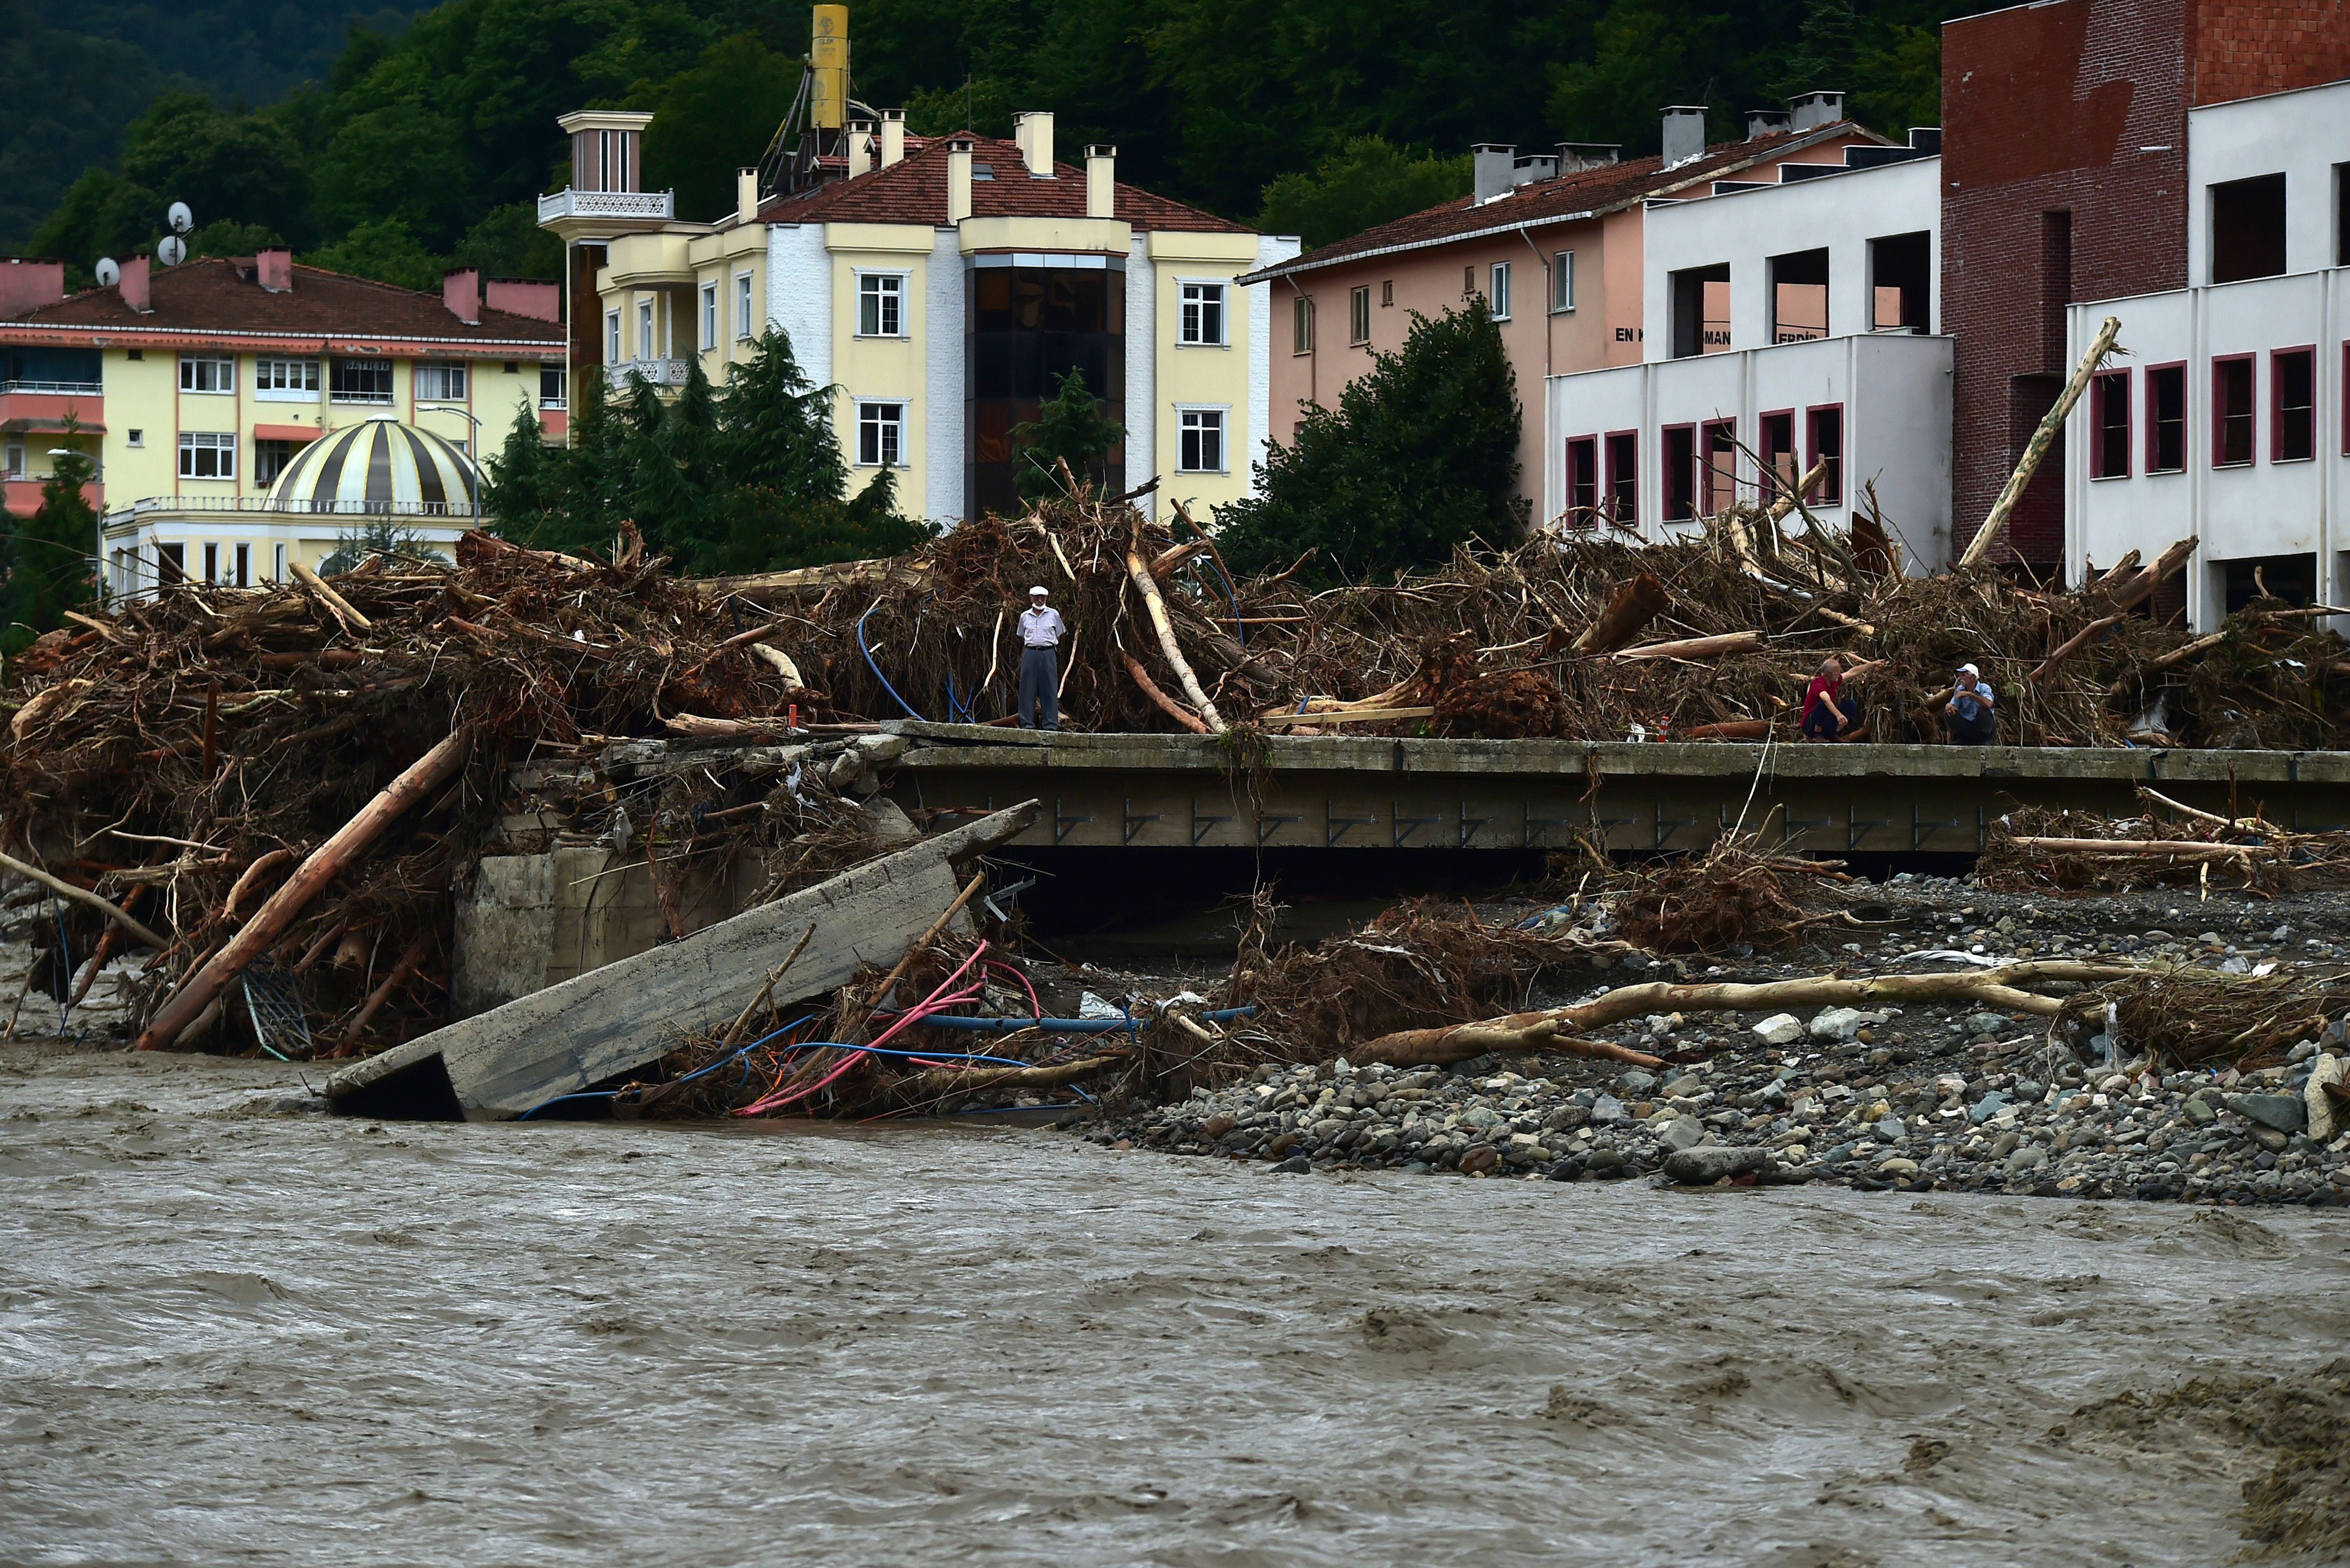 A man watches the destruction after floods and mudslides killed about three dozens of people, in Bozkurt town of Kastamonu pr